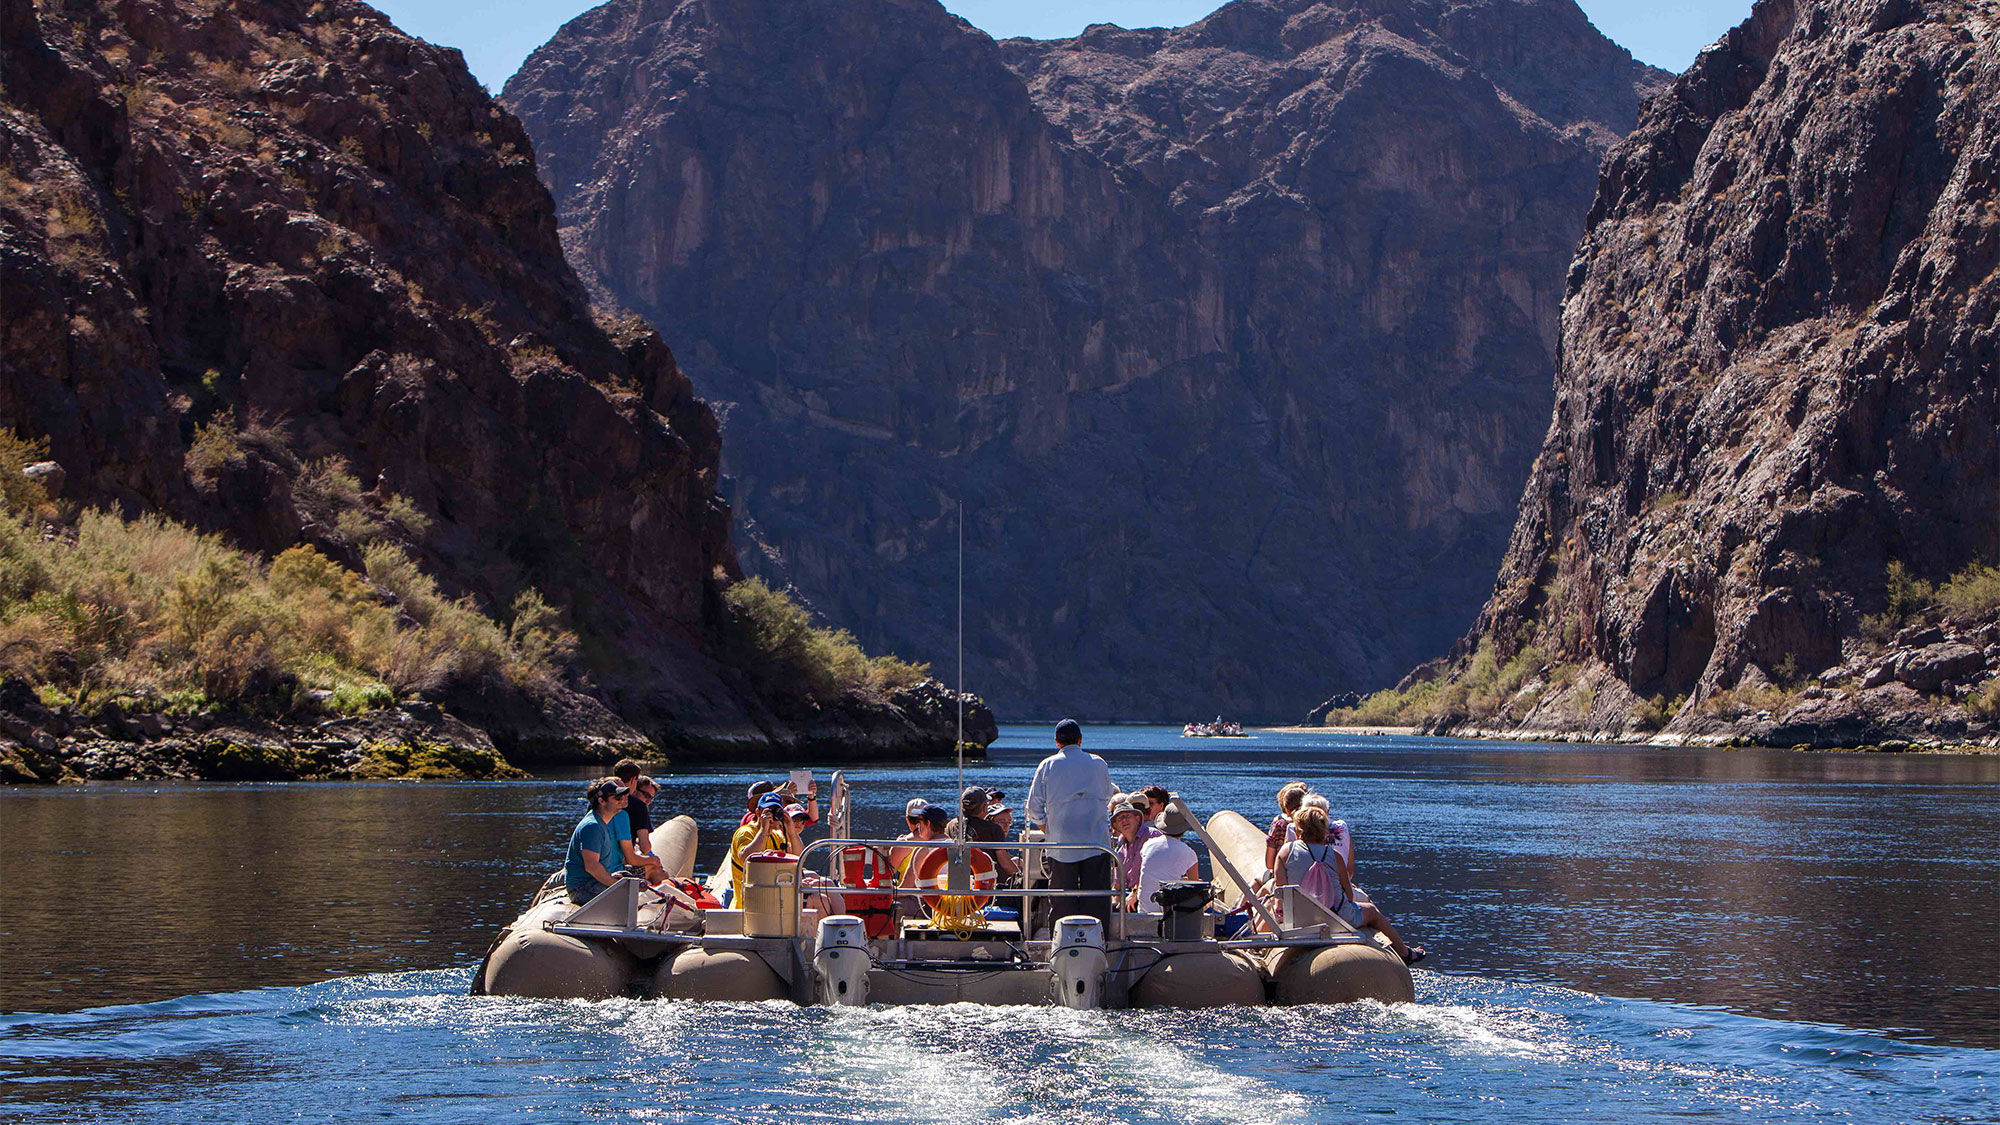 T0214RAFT3_C_HR [Credit: Lake Mead Mohave Adventures]